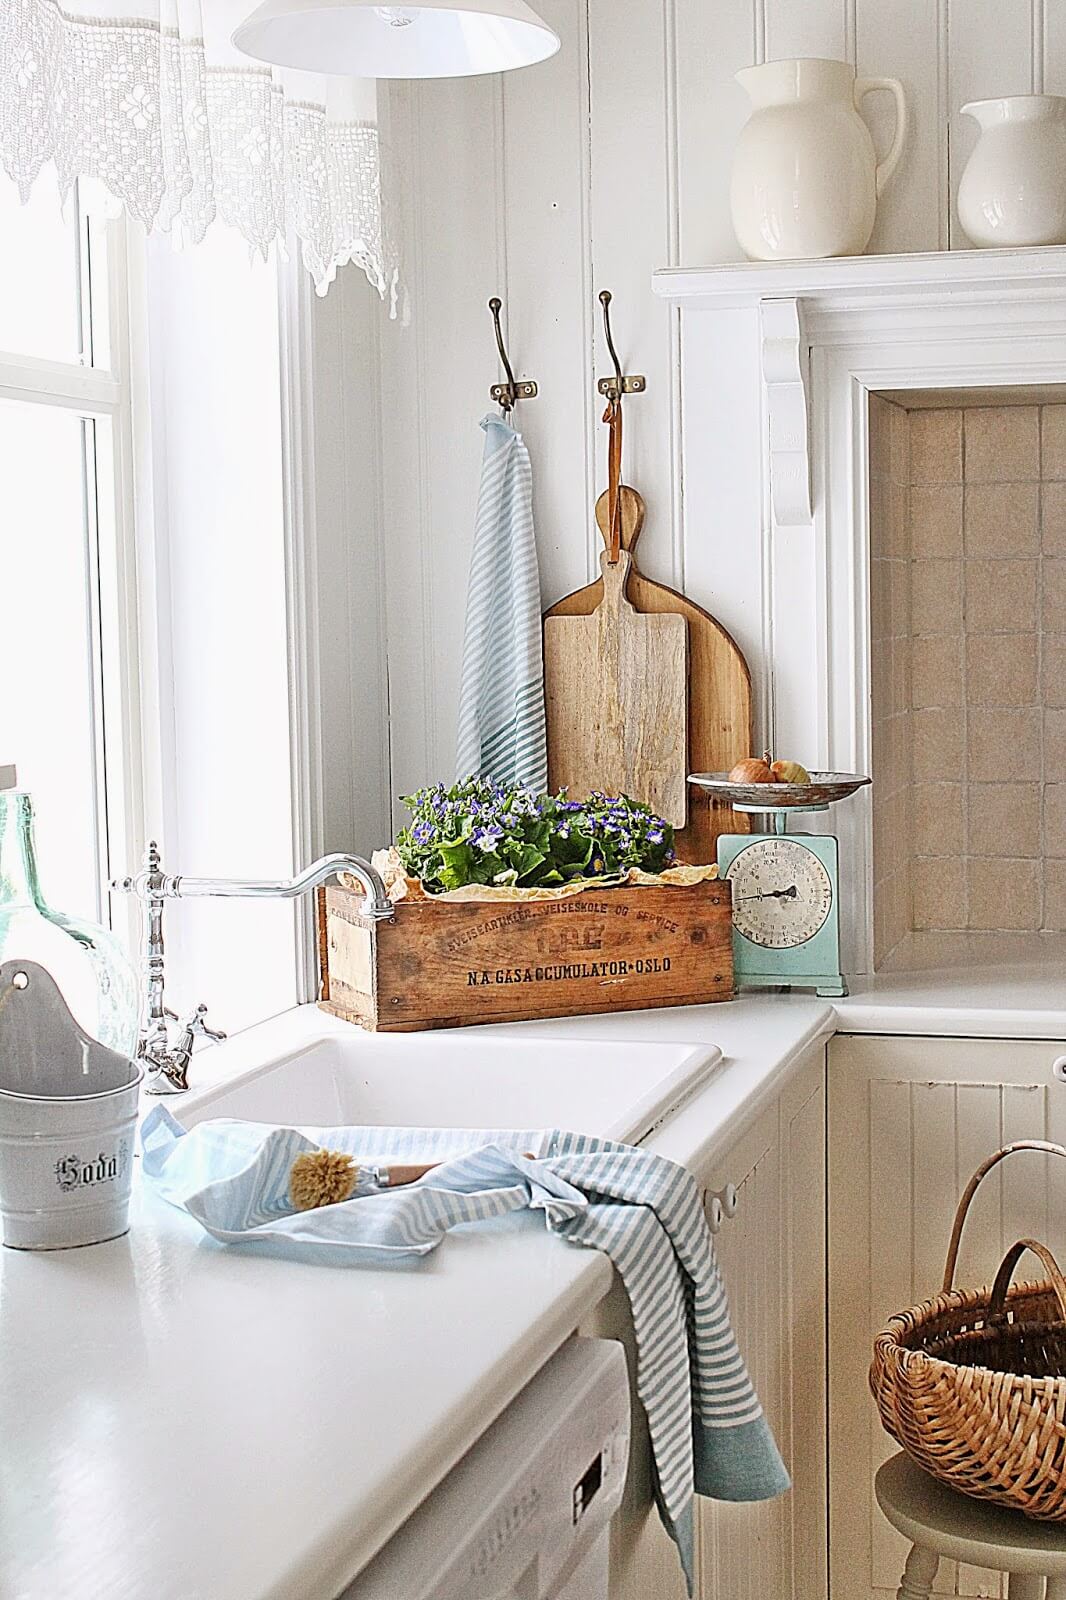 Accessories for the Cottage Kitchen